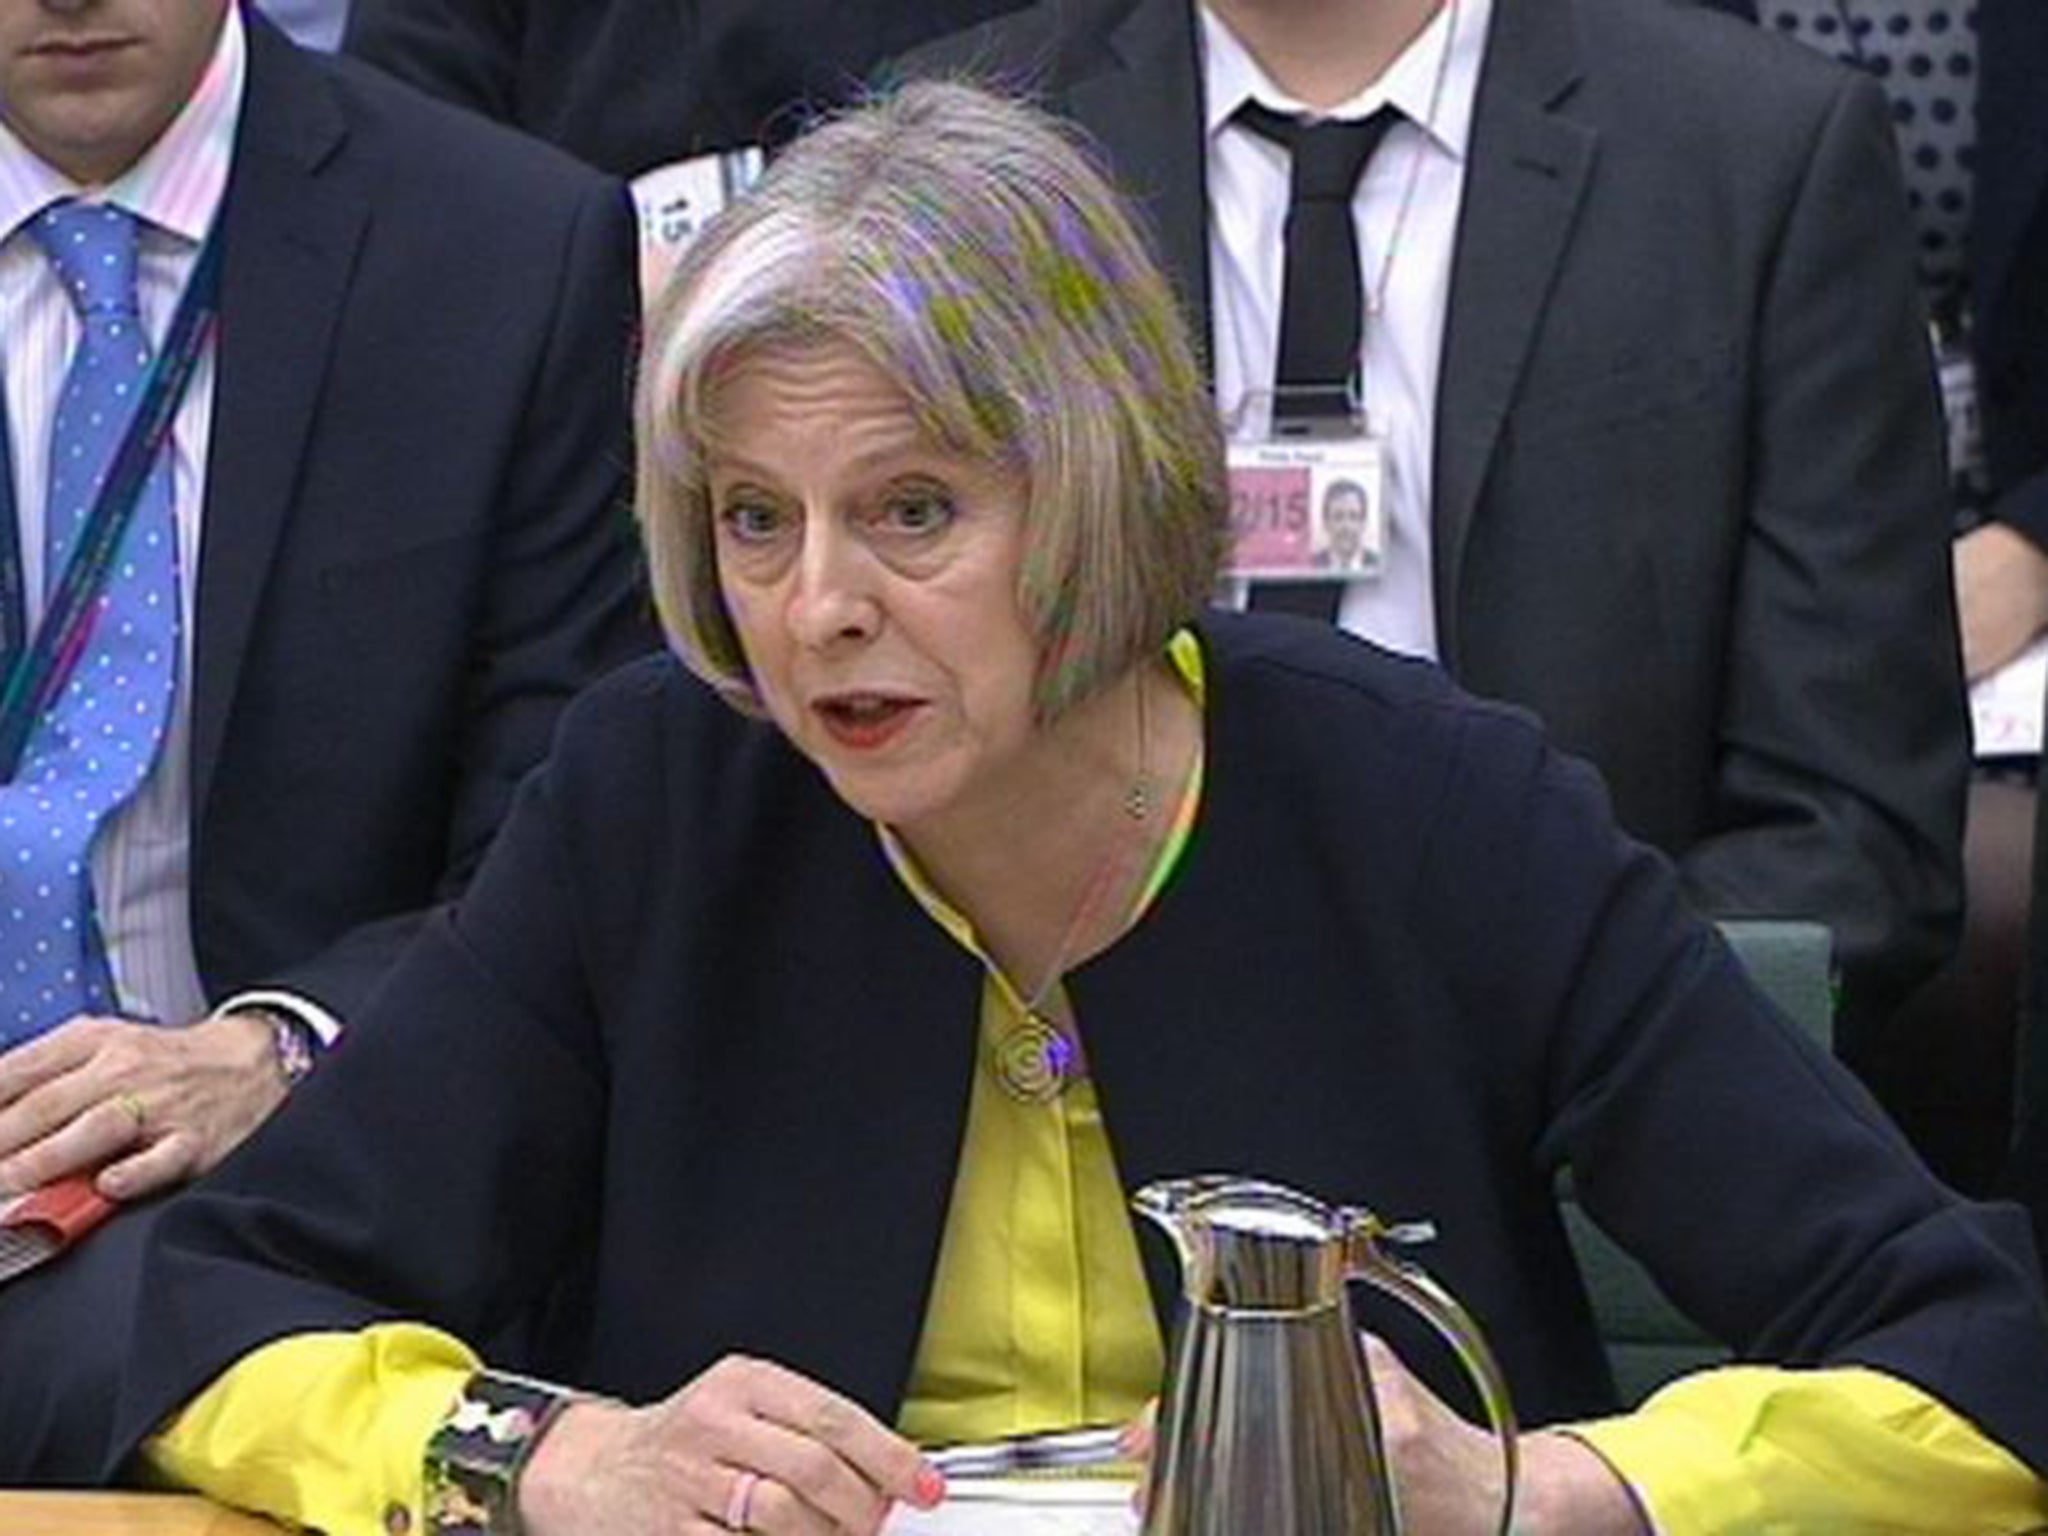 Theresa May told the home affairs select committee that the Home Office had received more than 100 names of possible candidates to chair the inquiry (PA)